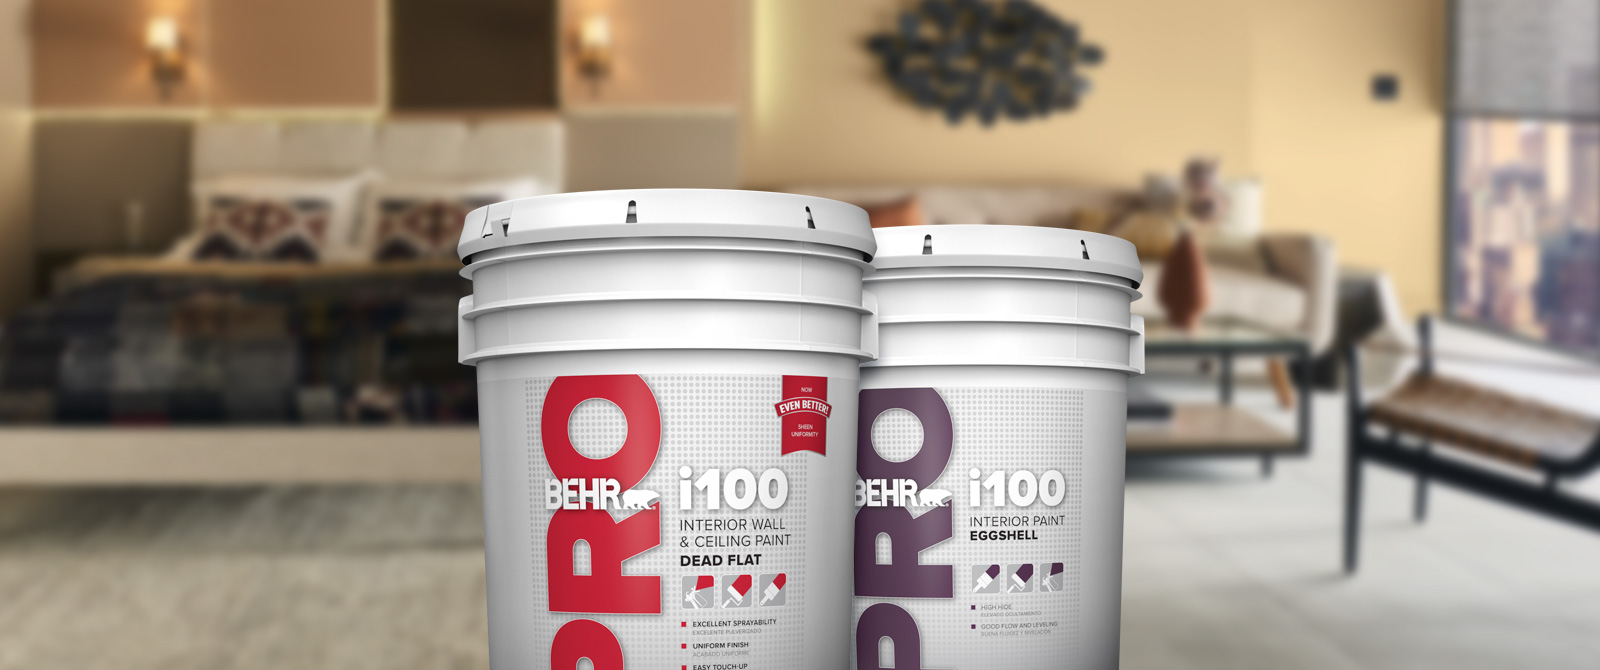 BEHR PRO interior i100 products landing page desktop image featuring 5 gallon i100 can.